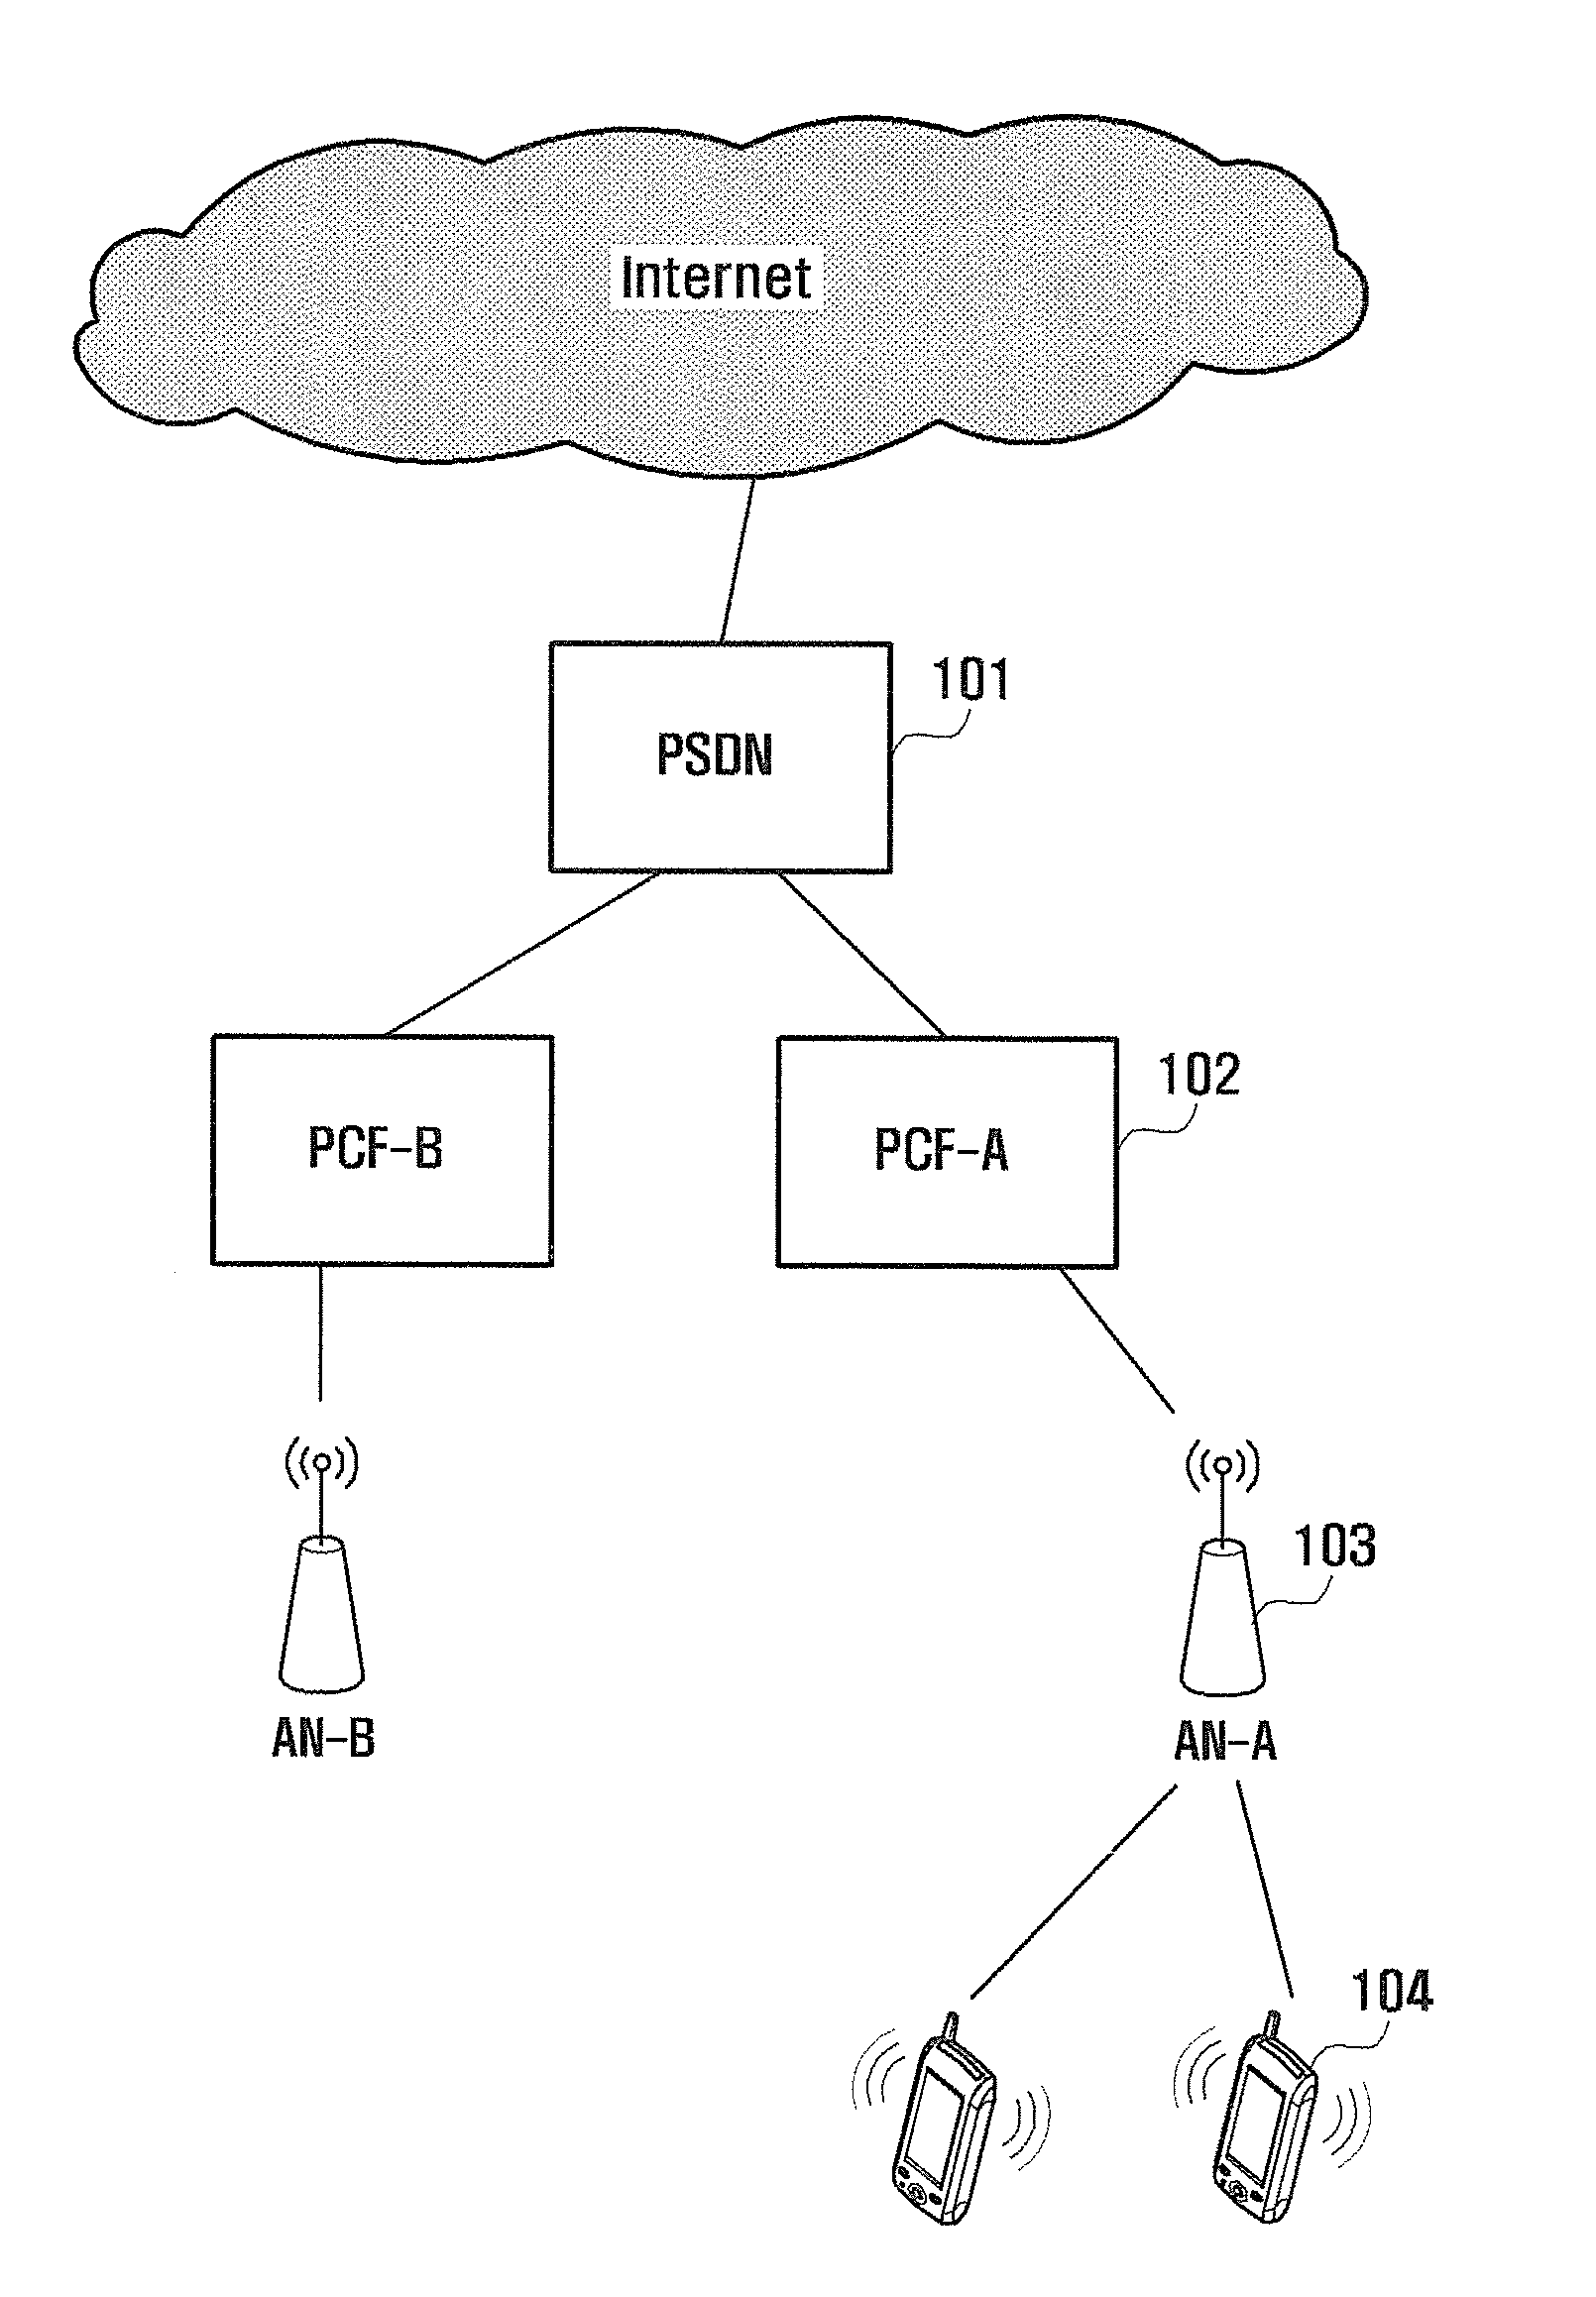 Power headroom report method and apparatus of user equipment